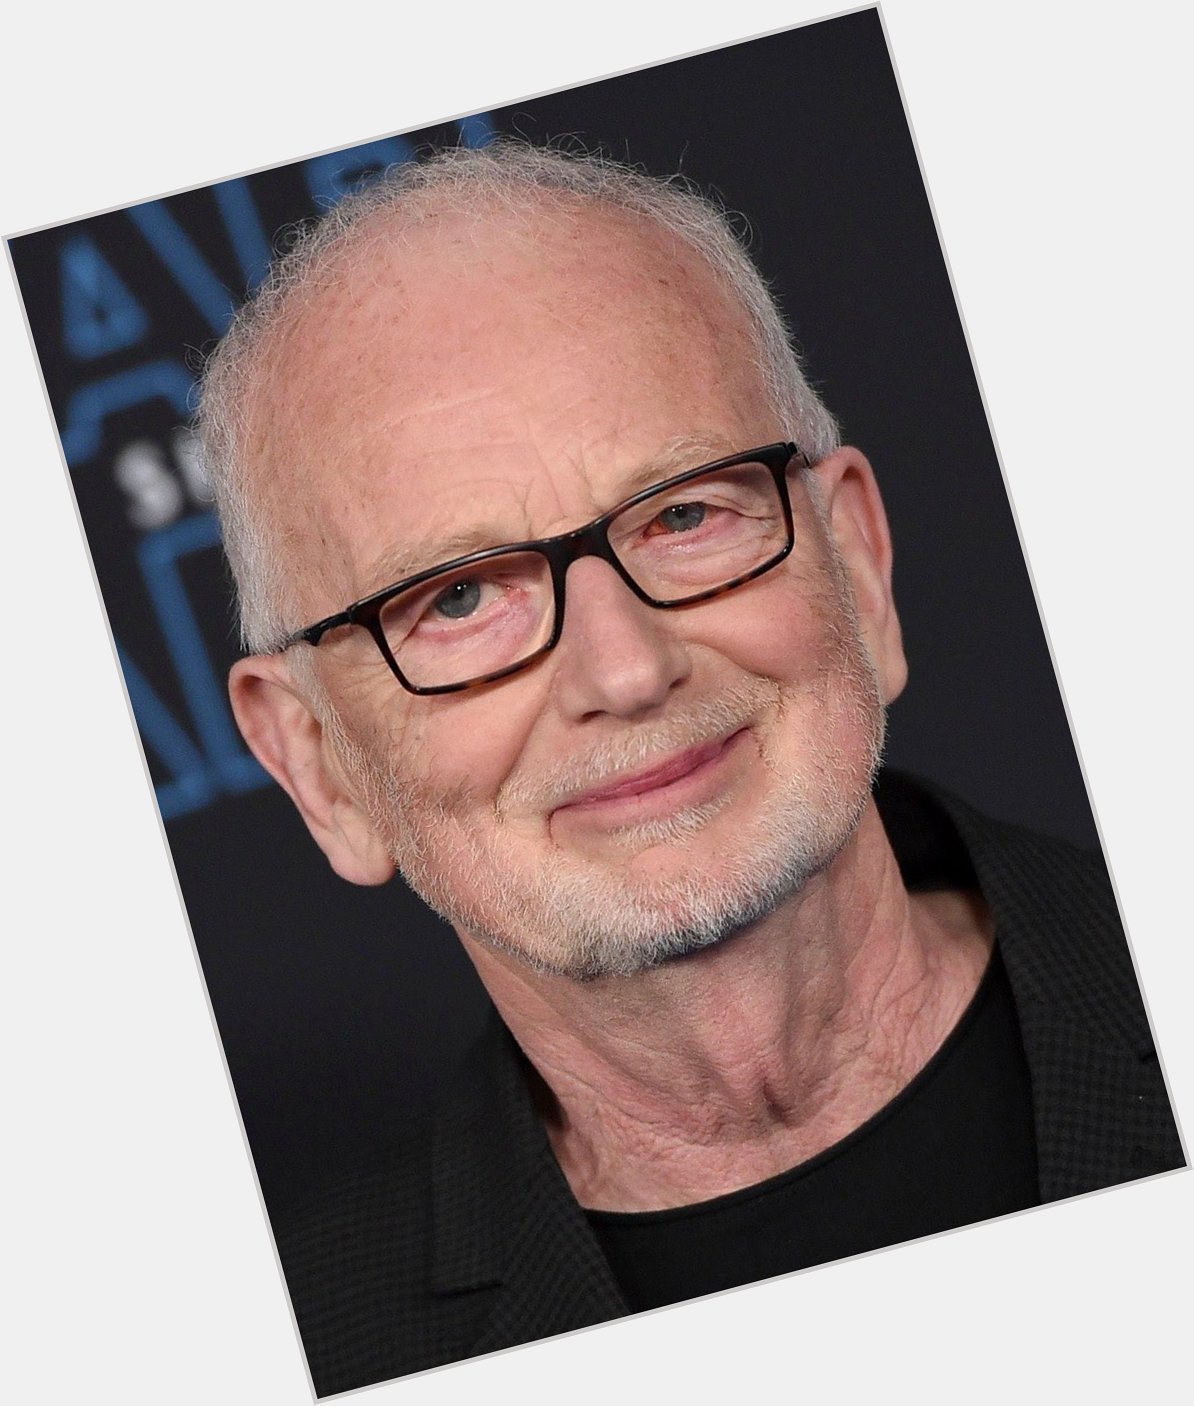 Happy 77th birthday to Ian McDiarmid, known for playing Emperor Sheev Palpatine in the Star Wars Skywalker Saga! 